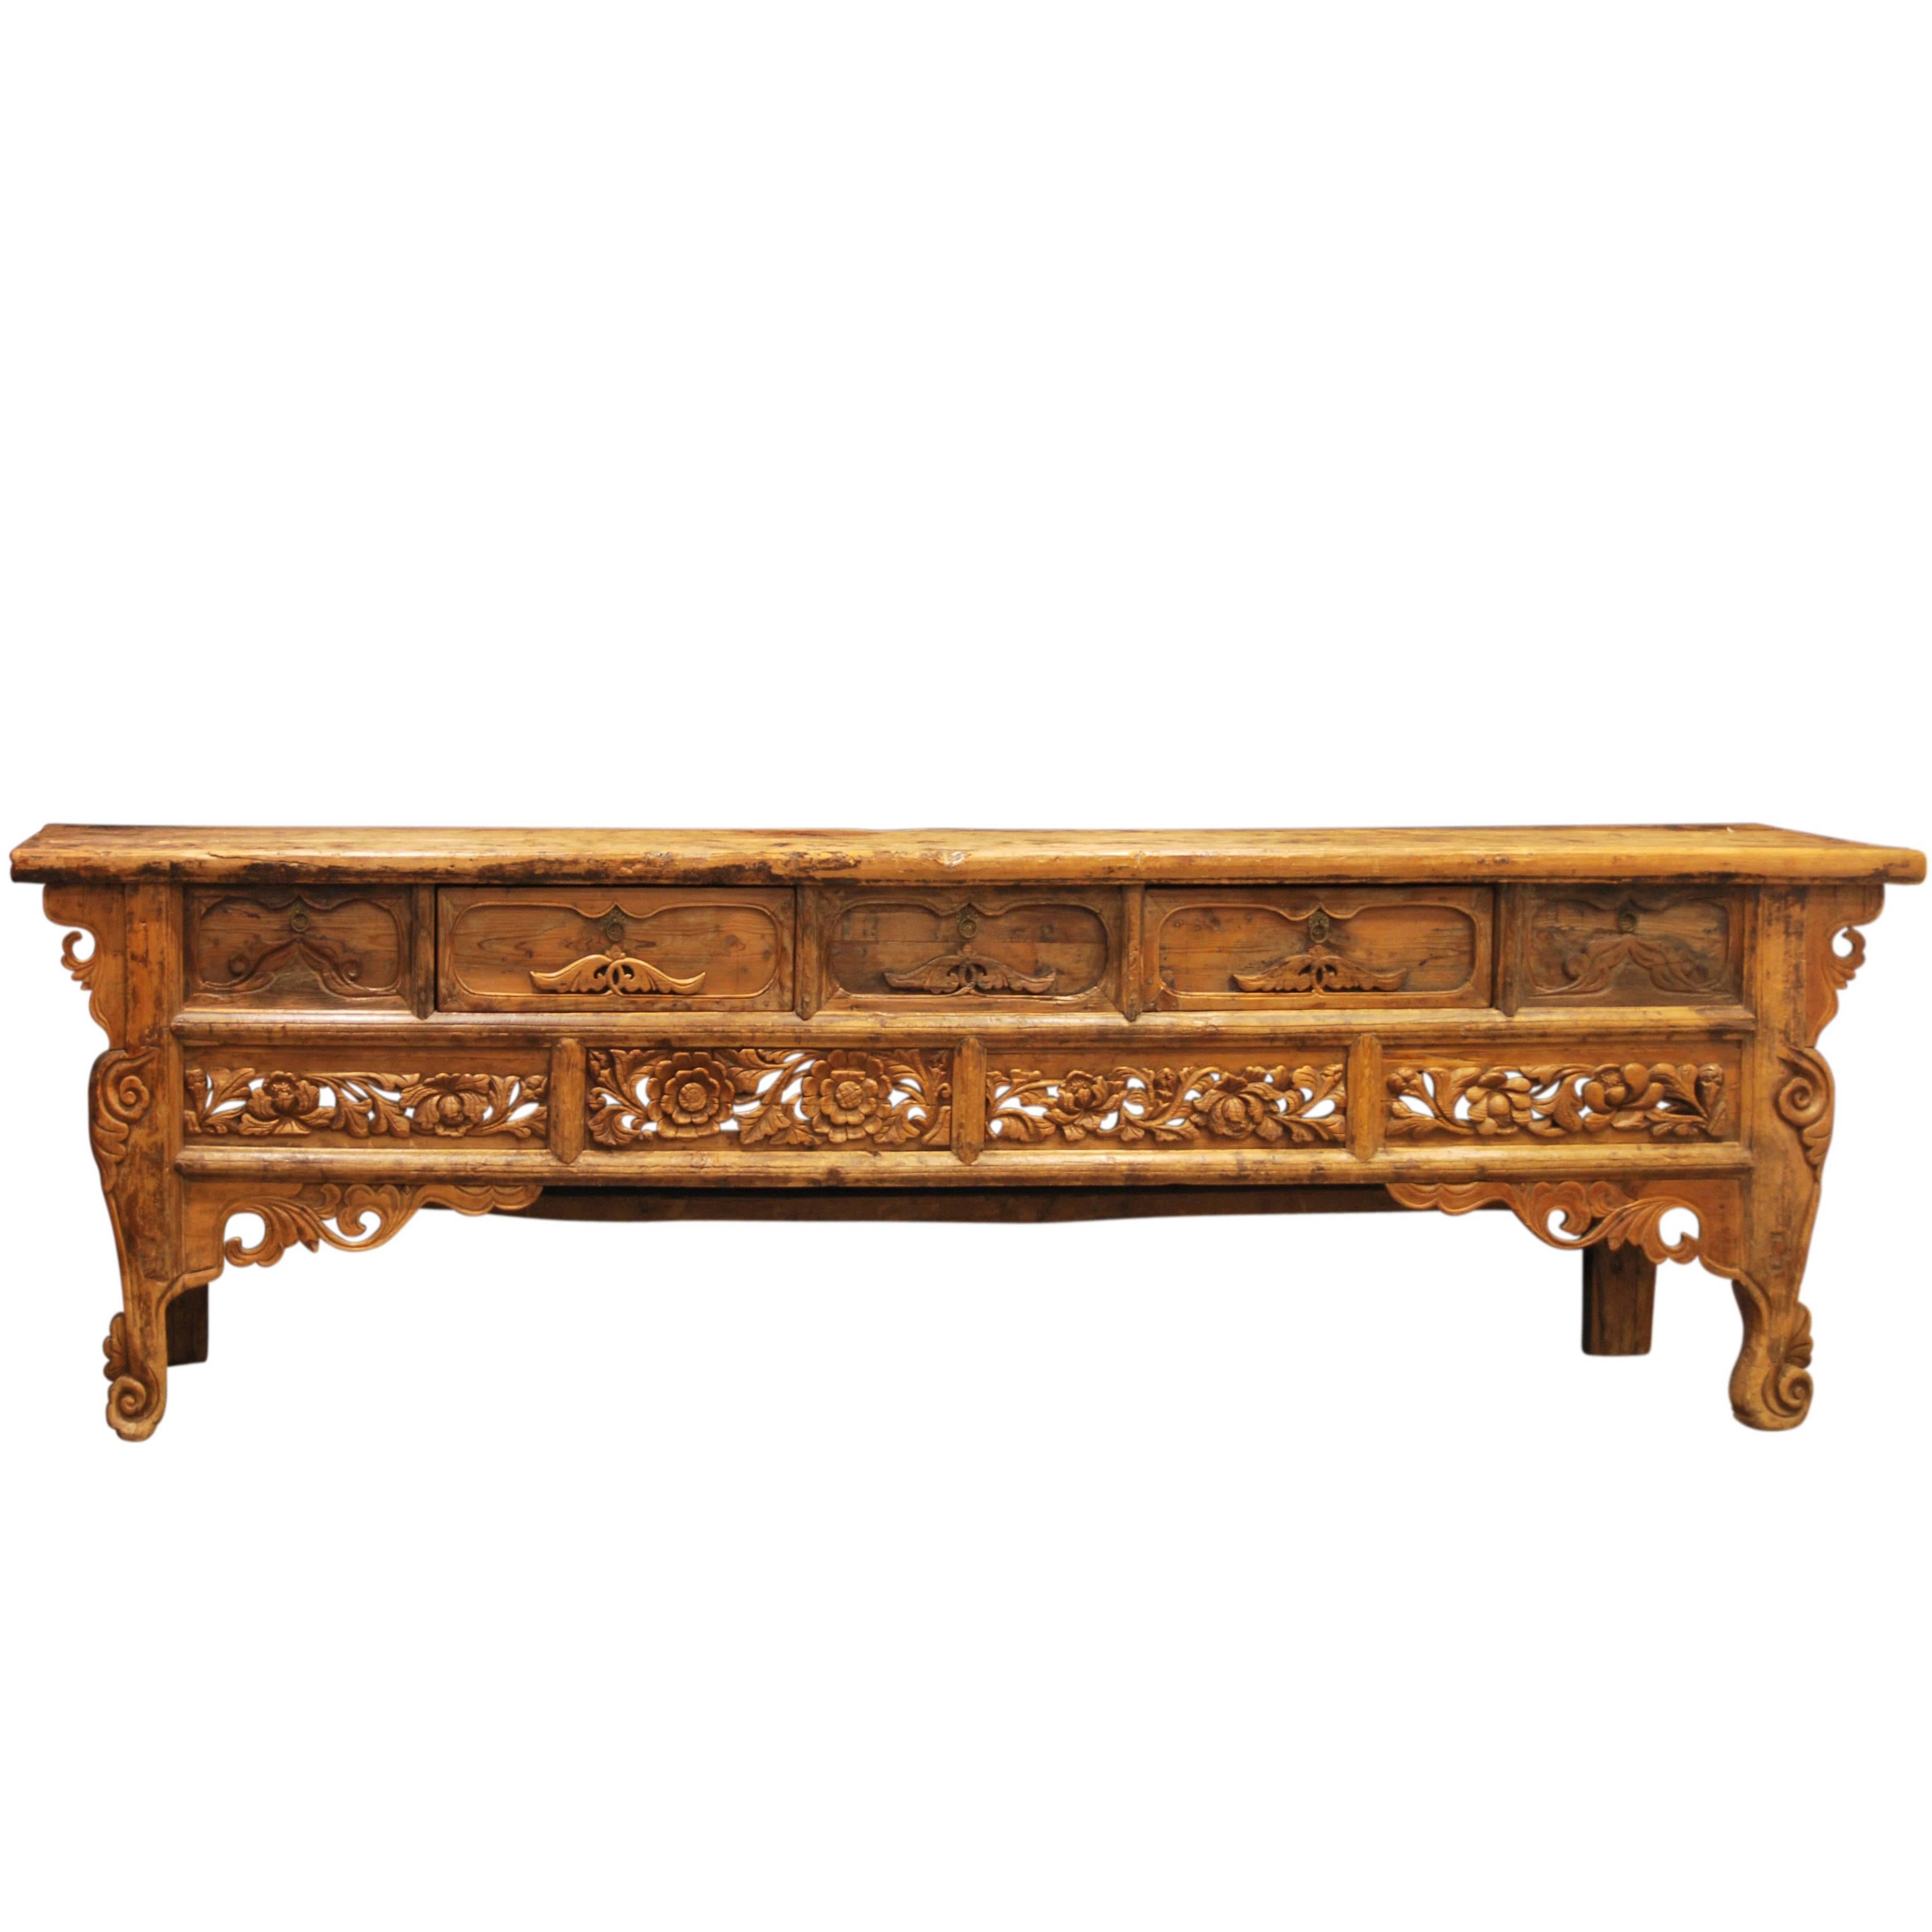 Rare Chinese Buddhist Altar Table, Yuan Dynasty, 14th Century For Sale